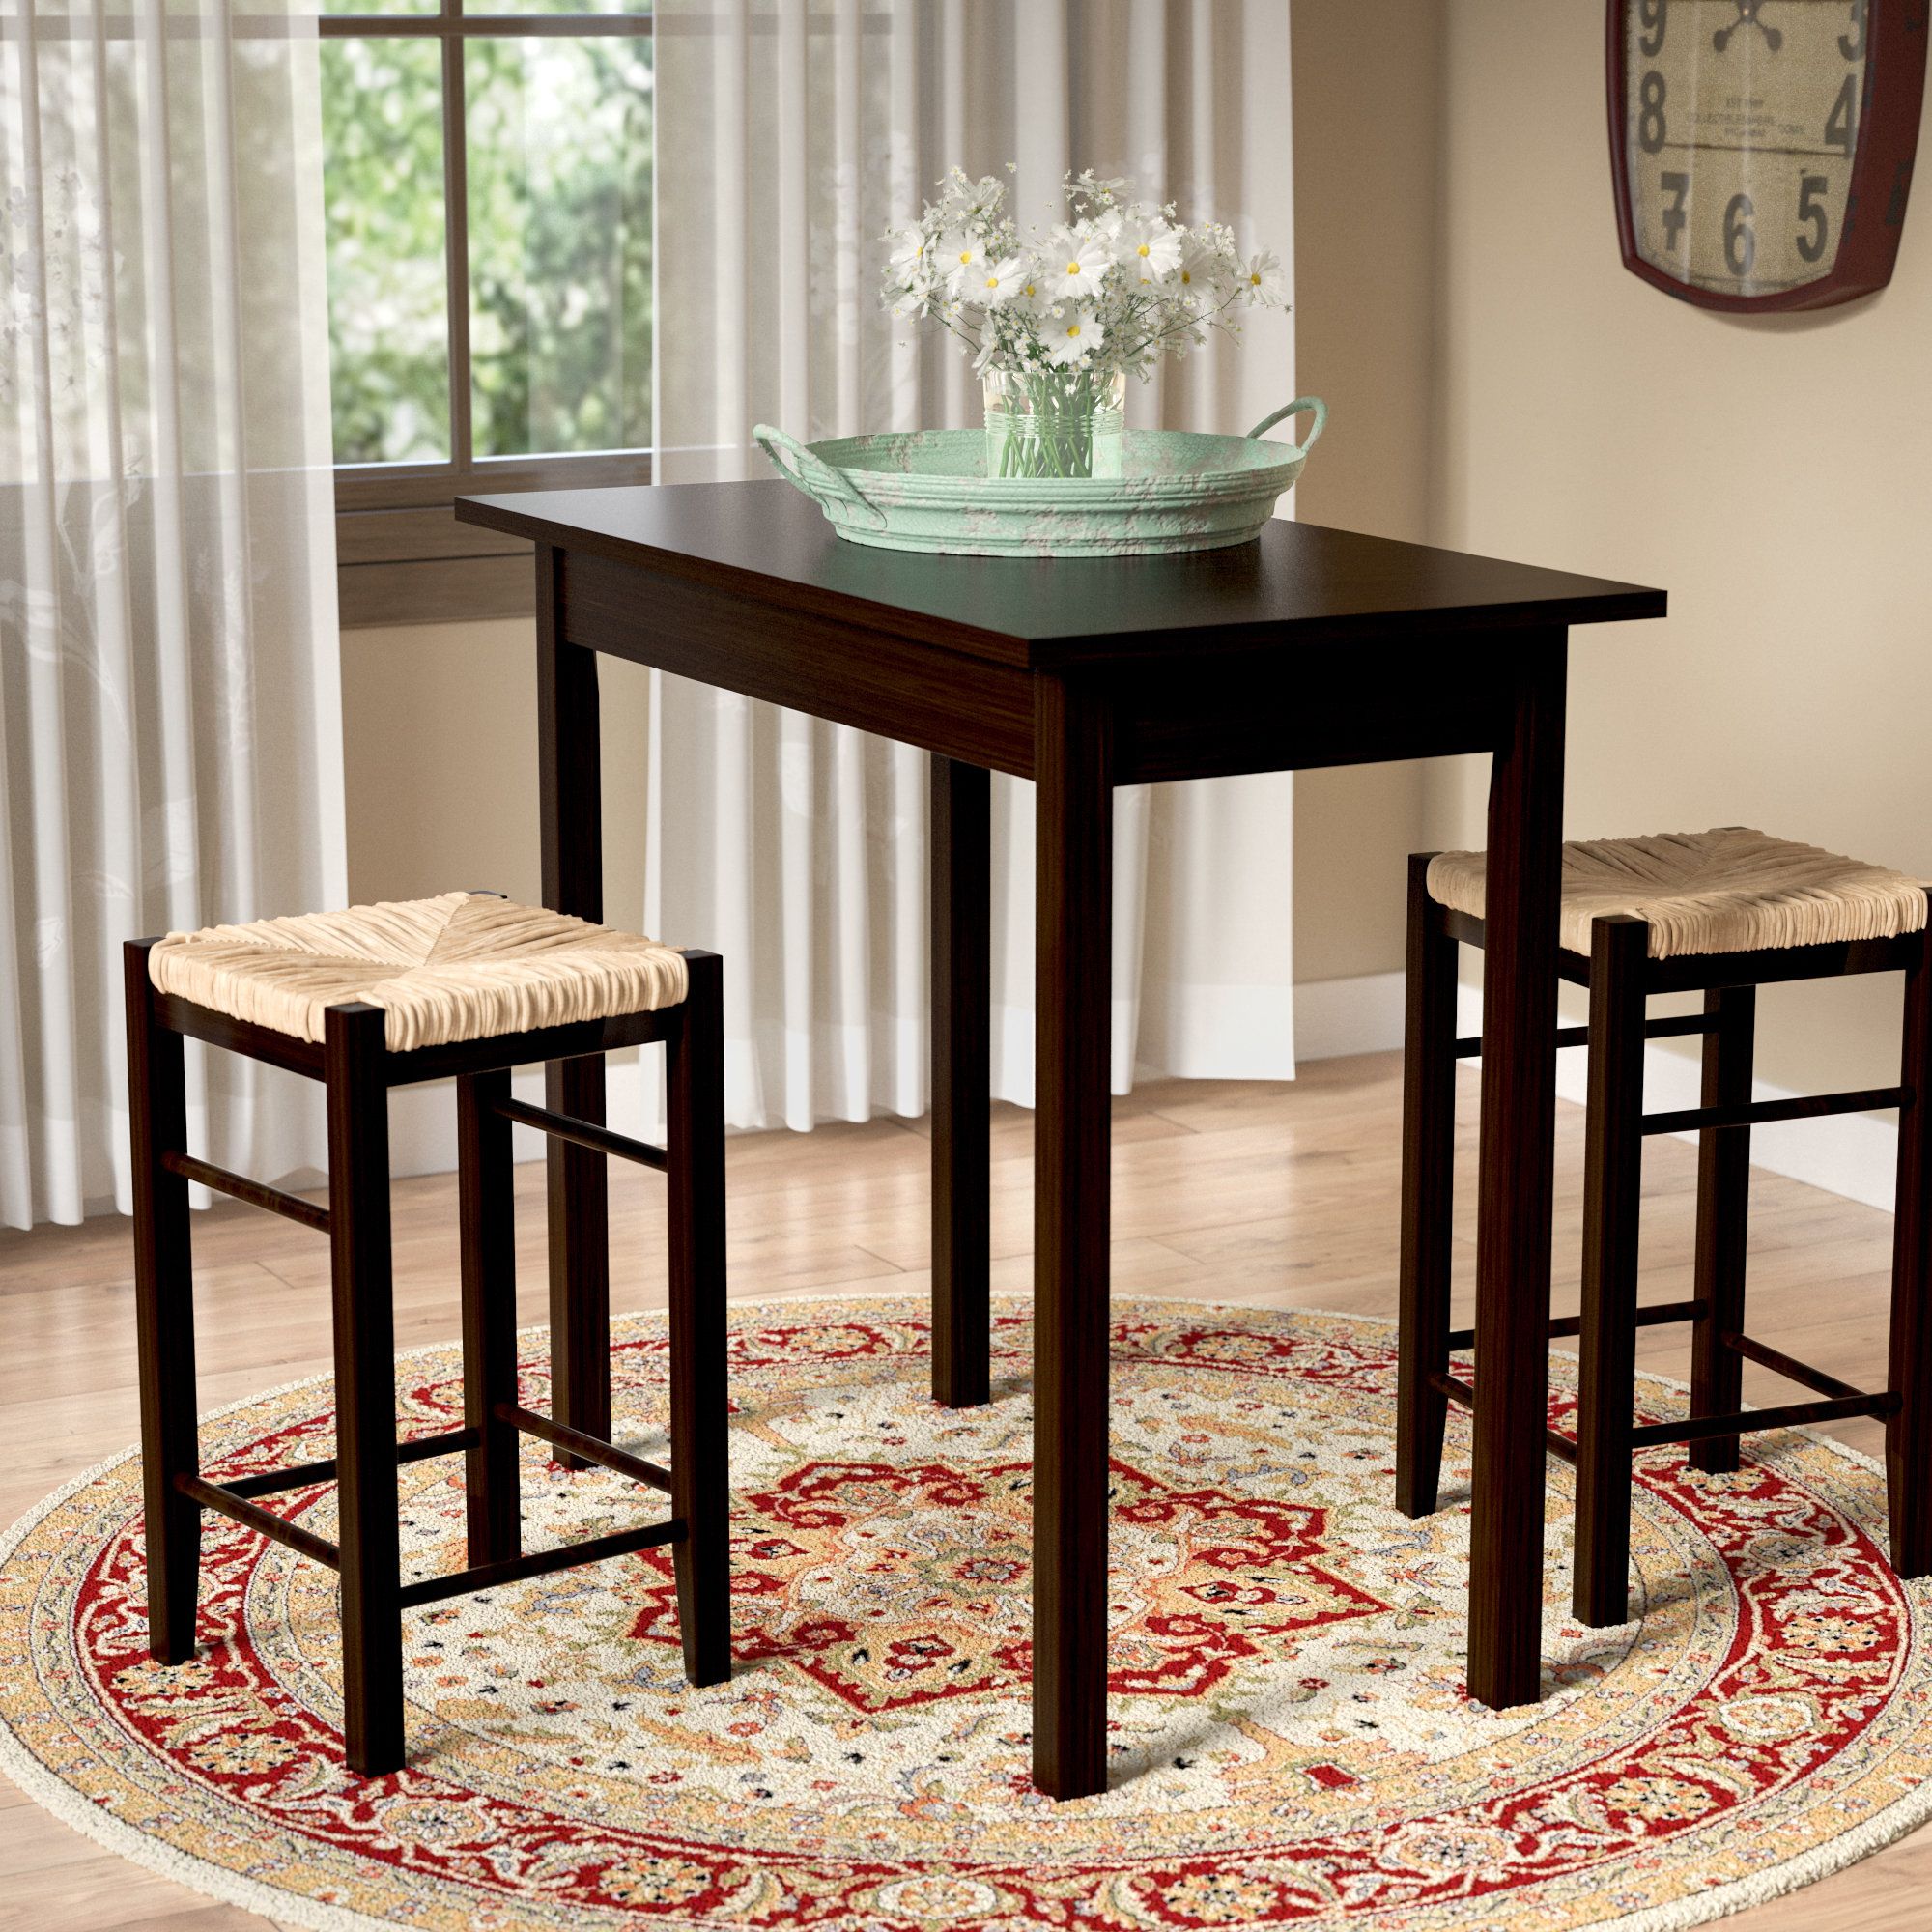 Hood Canal 3 Piece Dining Sets Intended For 2019 August Grove Tenney 3 Piece Counter Height Dining Set & Reviews (View 13 of 20)